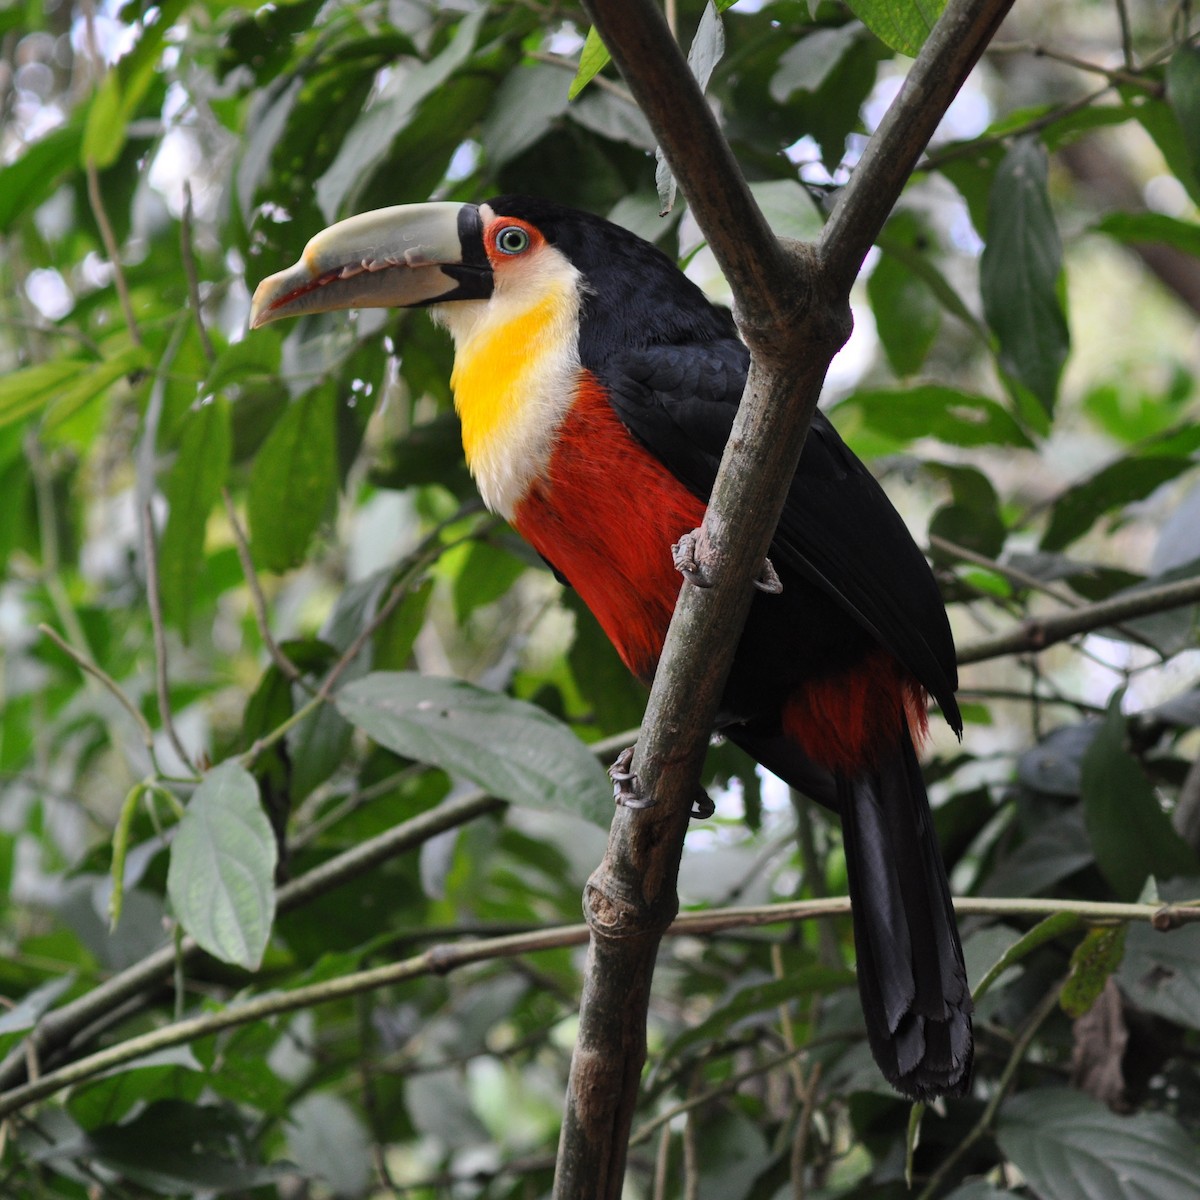 Red-breasted Toucan - Diana Flora Padron Novoa